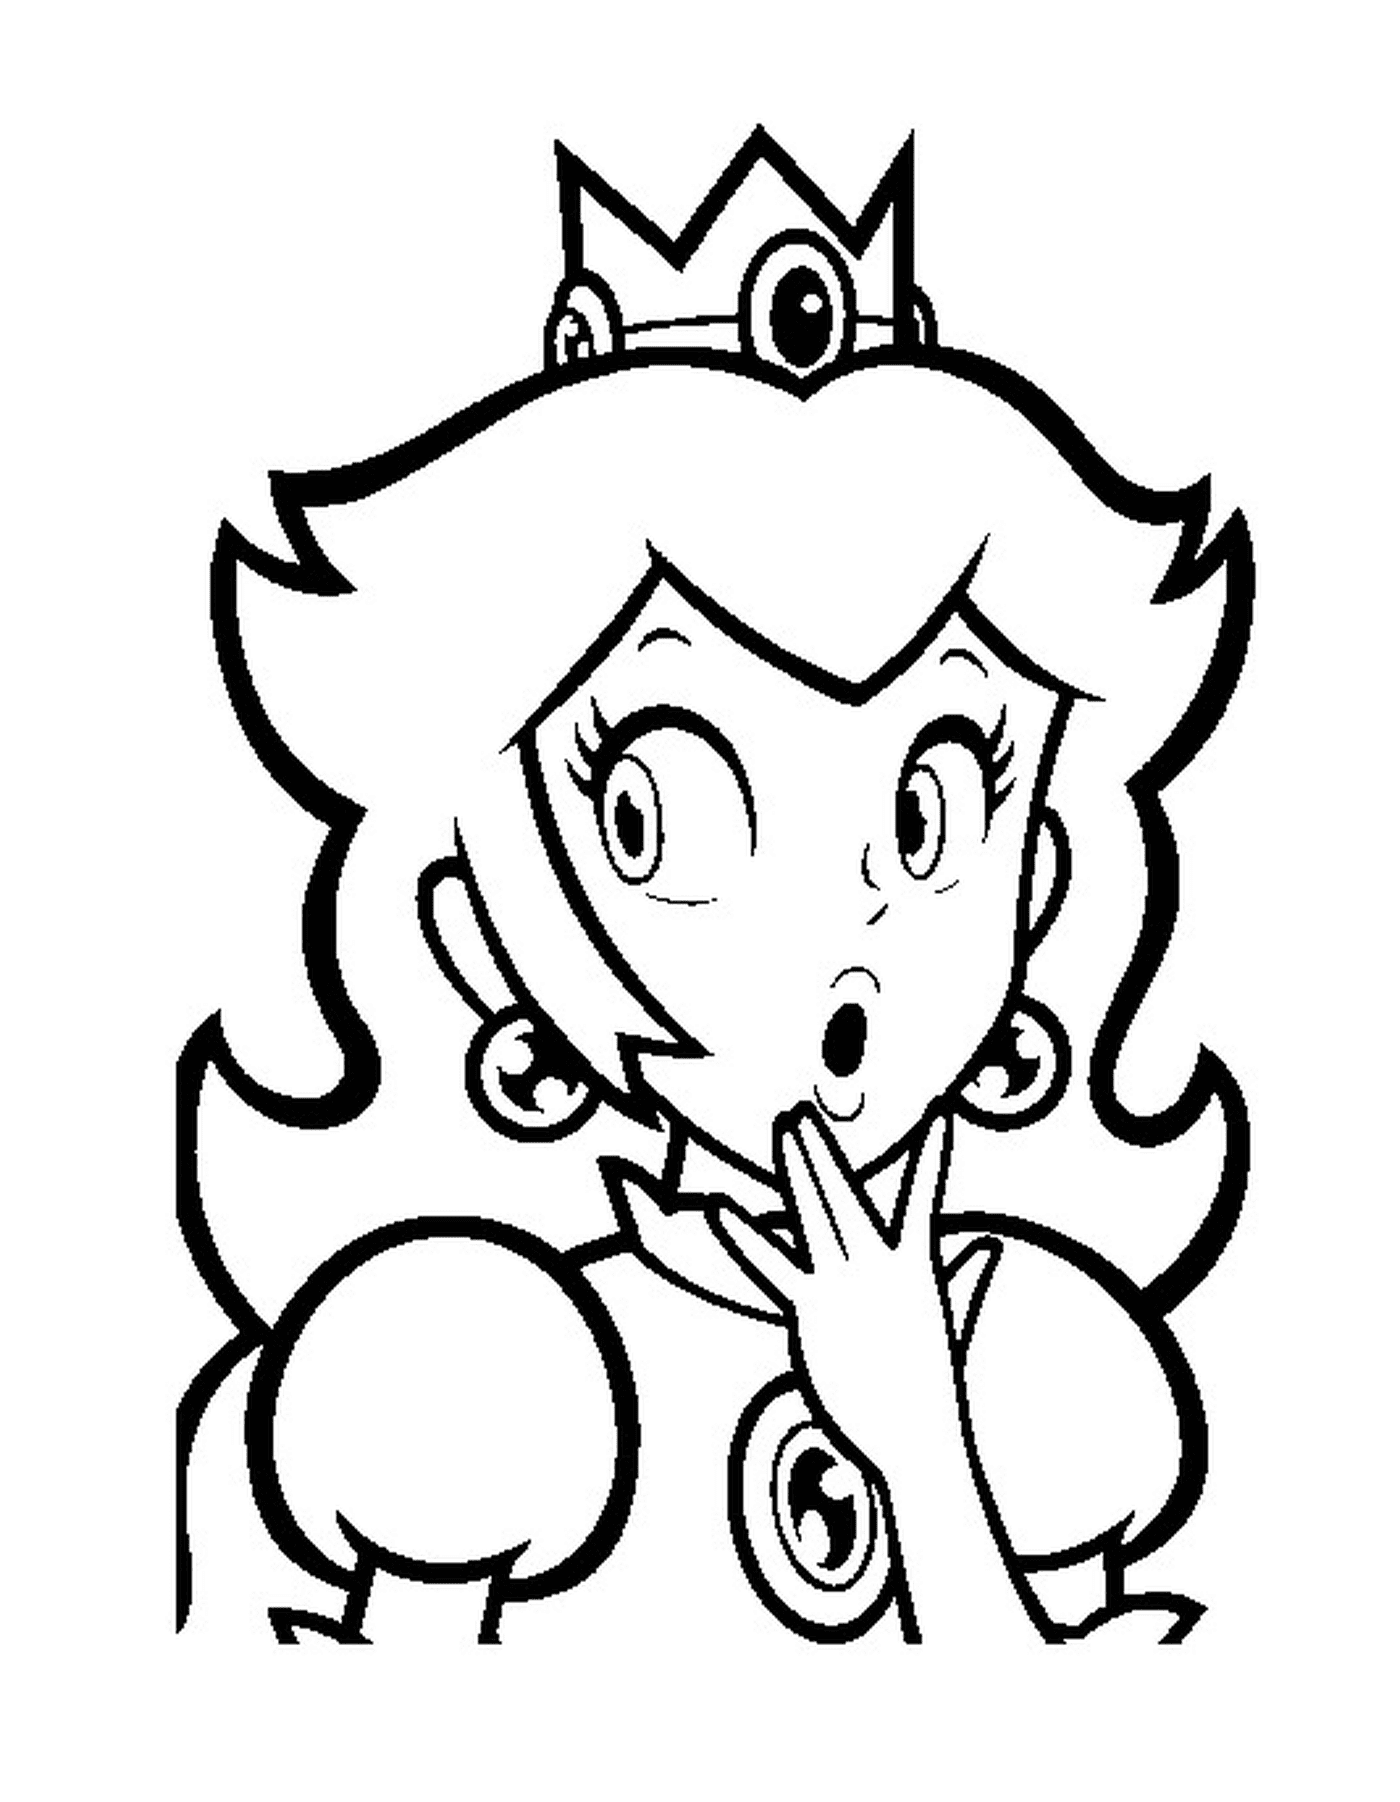  Character of Daisy de Mario with open mouth 